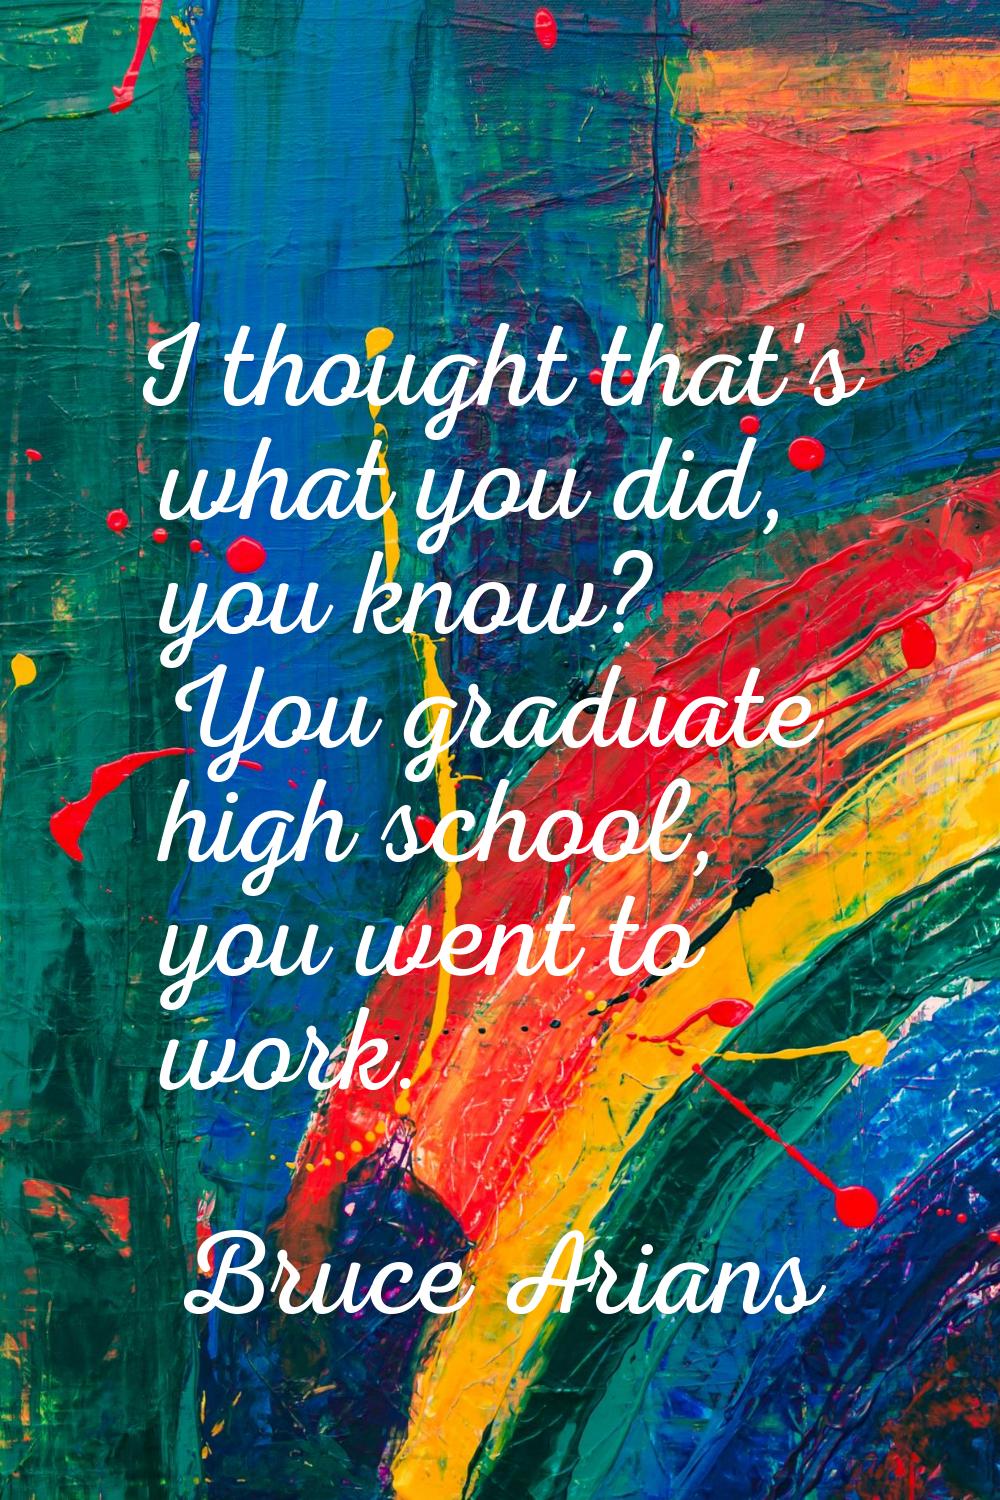 I thought that's what you did, you know? You graduate high school, you went to work.